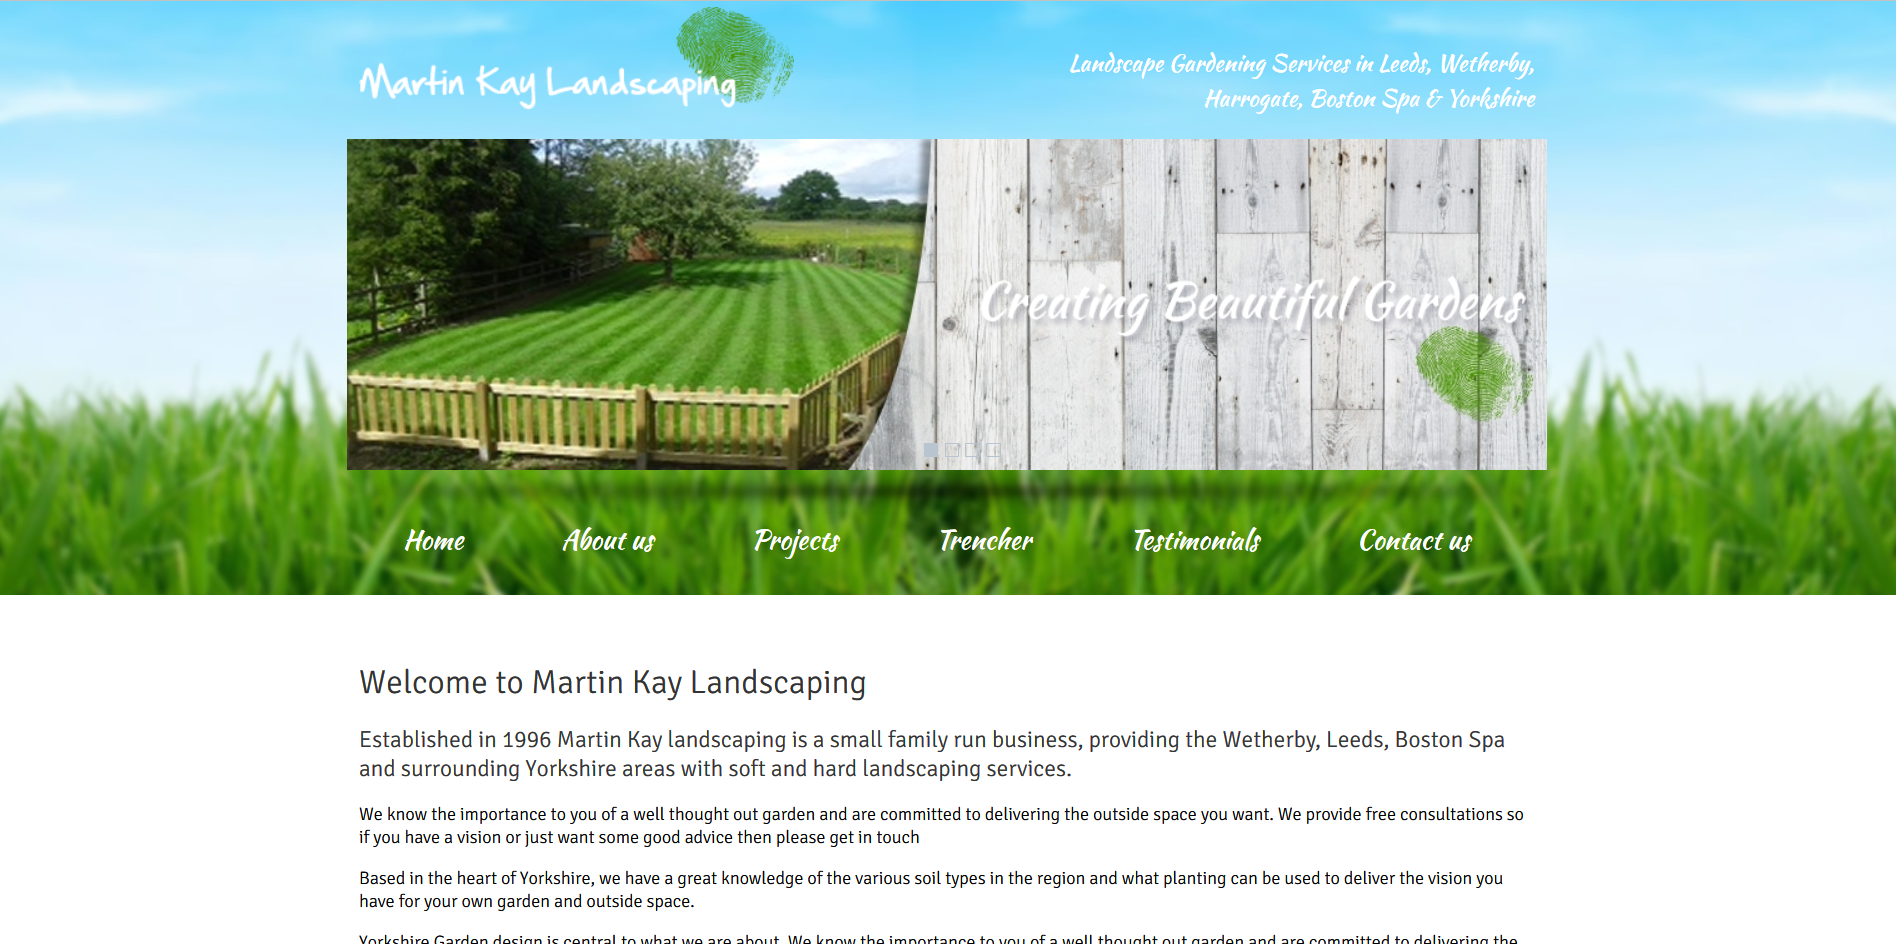 Sample of the design work on the Martin Kay Landscaping website